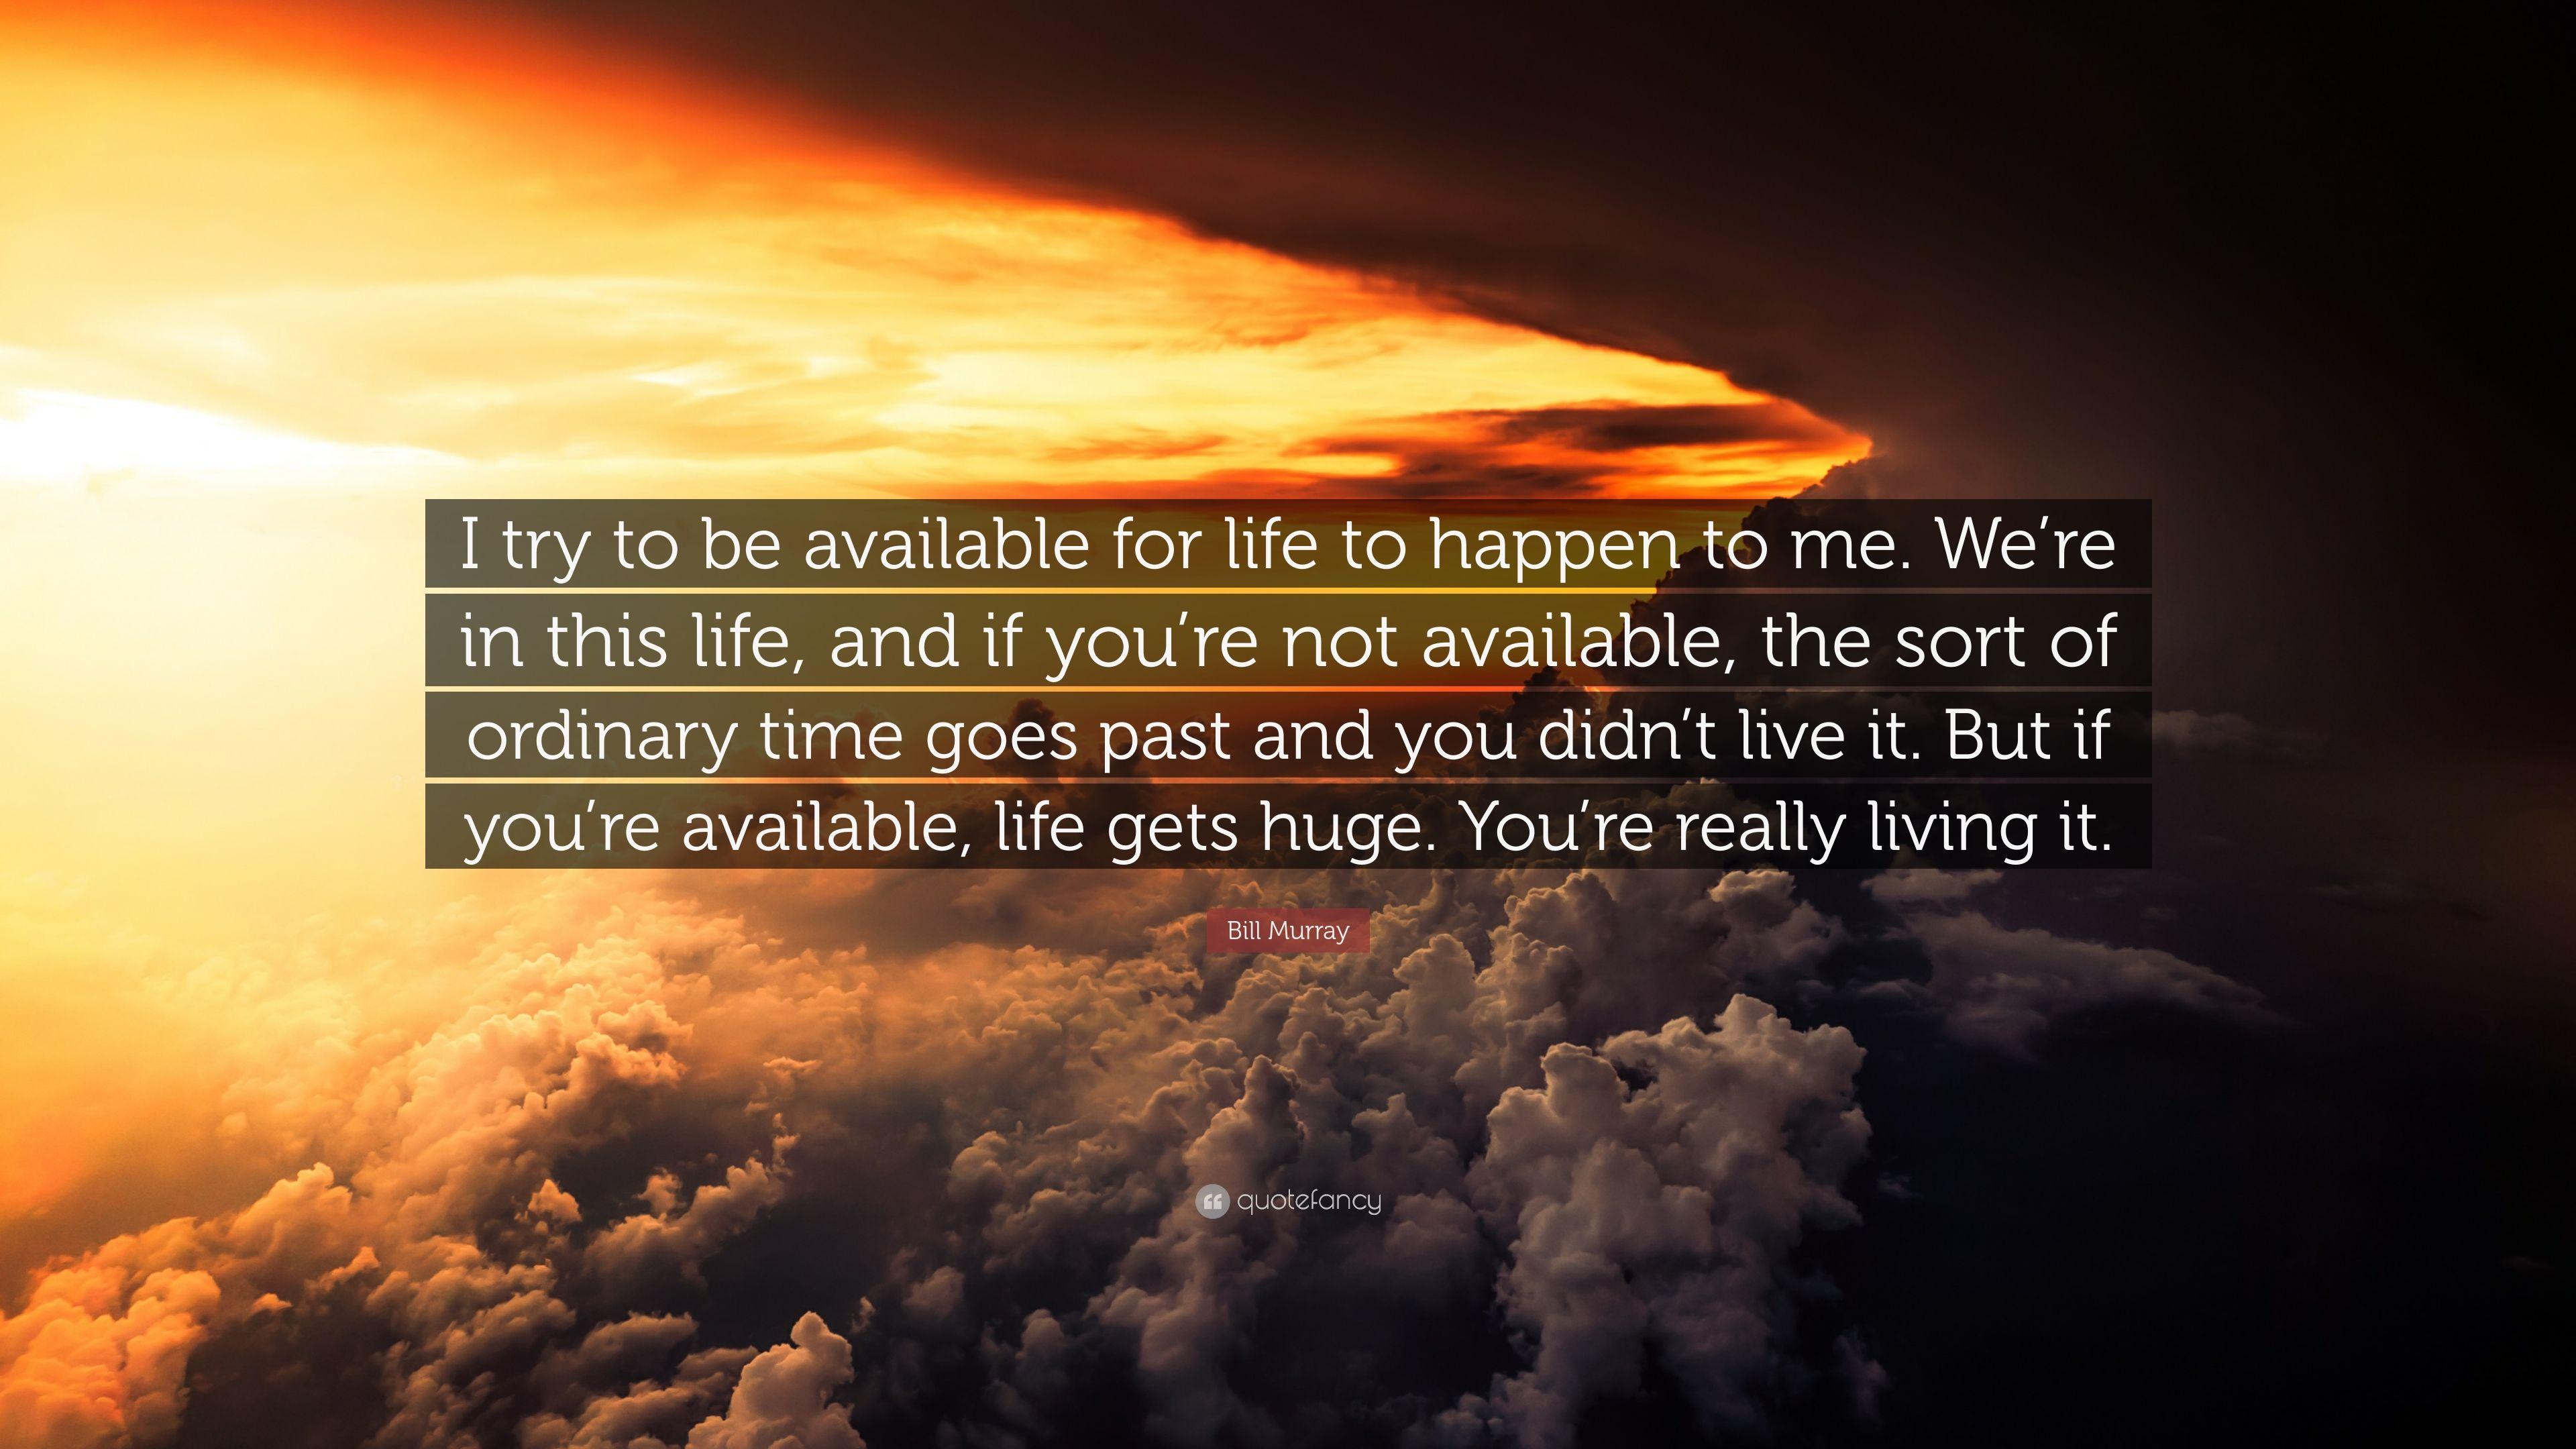 Bill Murray Quote: “I try to be available for life to happen to me